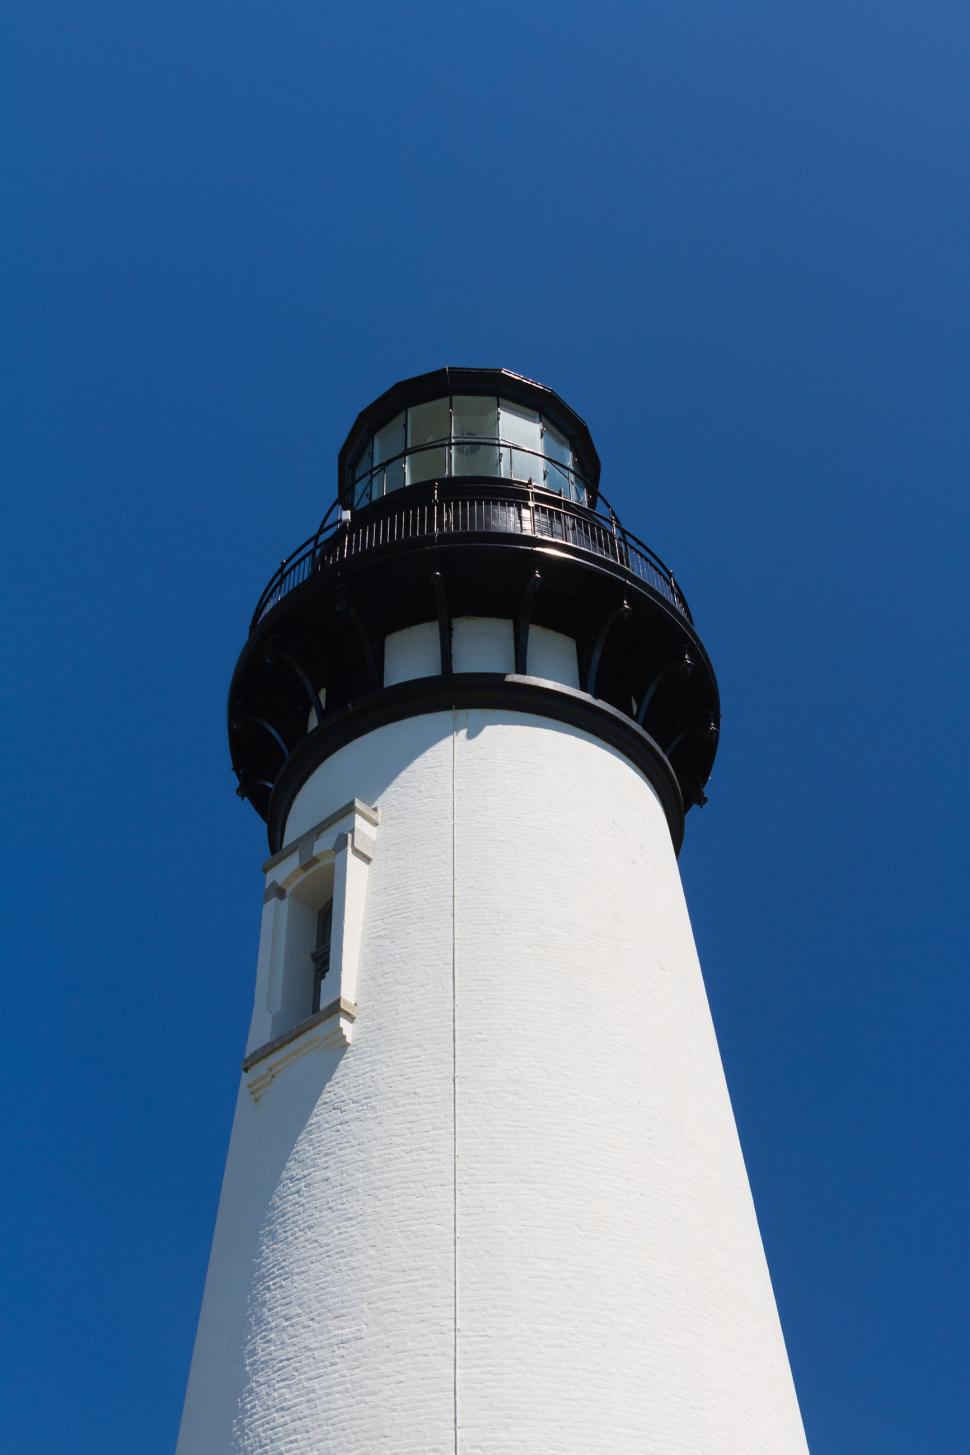 Download Free Stock Photo of Lighttower 